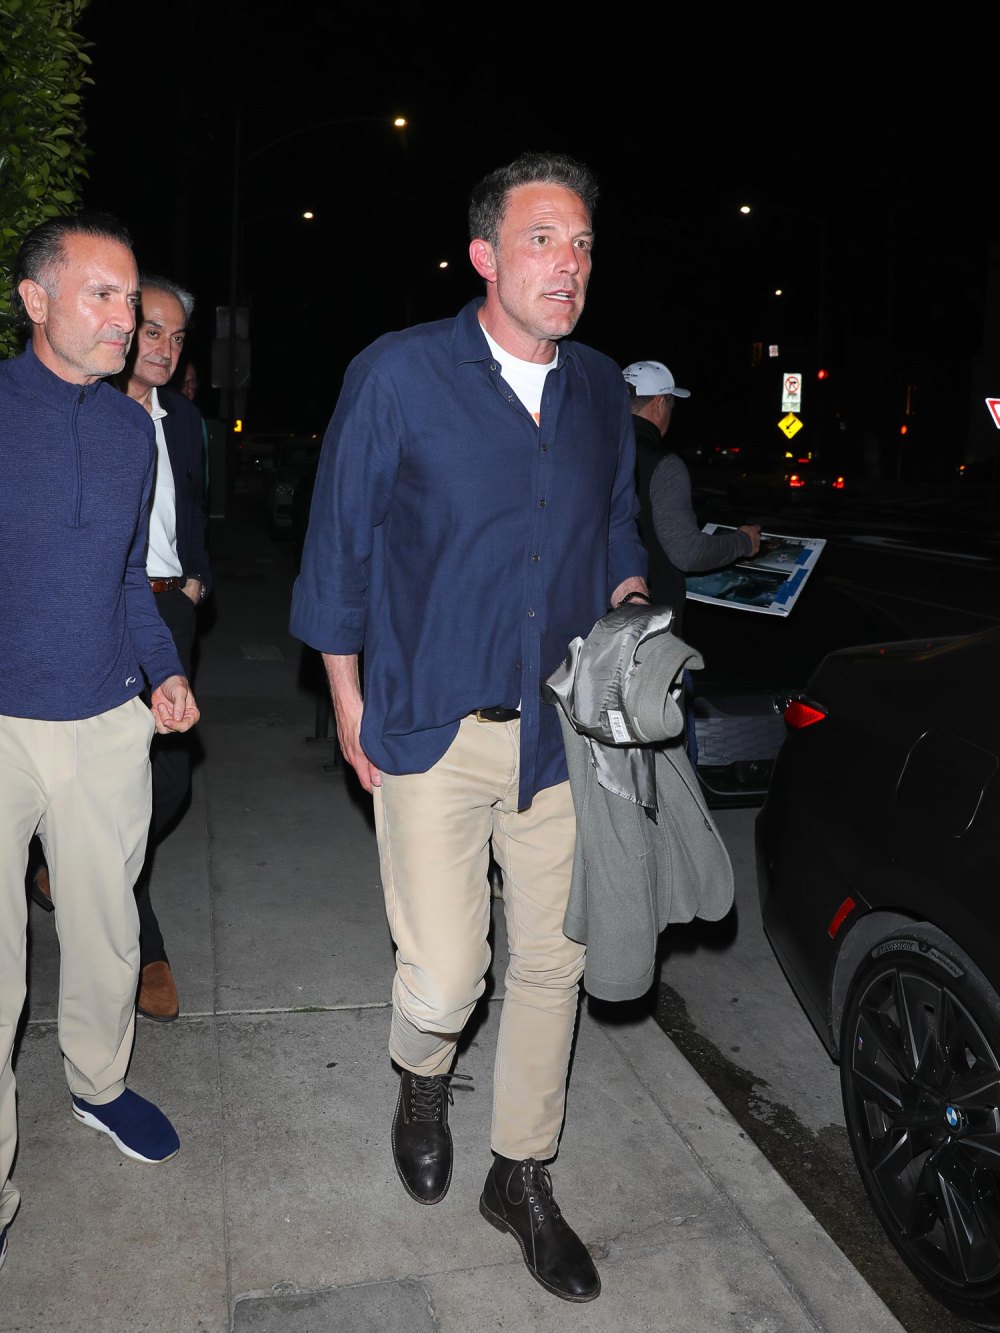 Ben Affleck Still Wearing Wedding Ring During Solo Outing as Jennifer Lopez Attends ‘Atlas’ Premiere 373